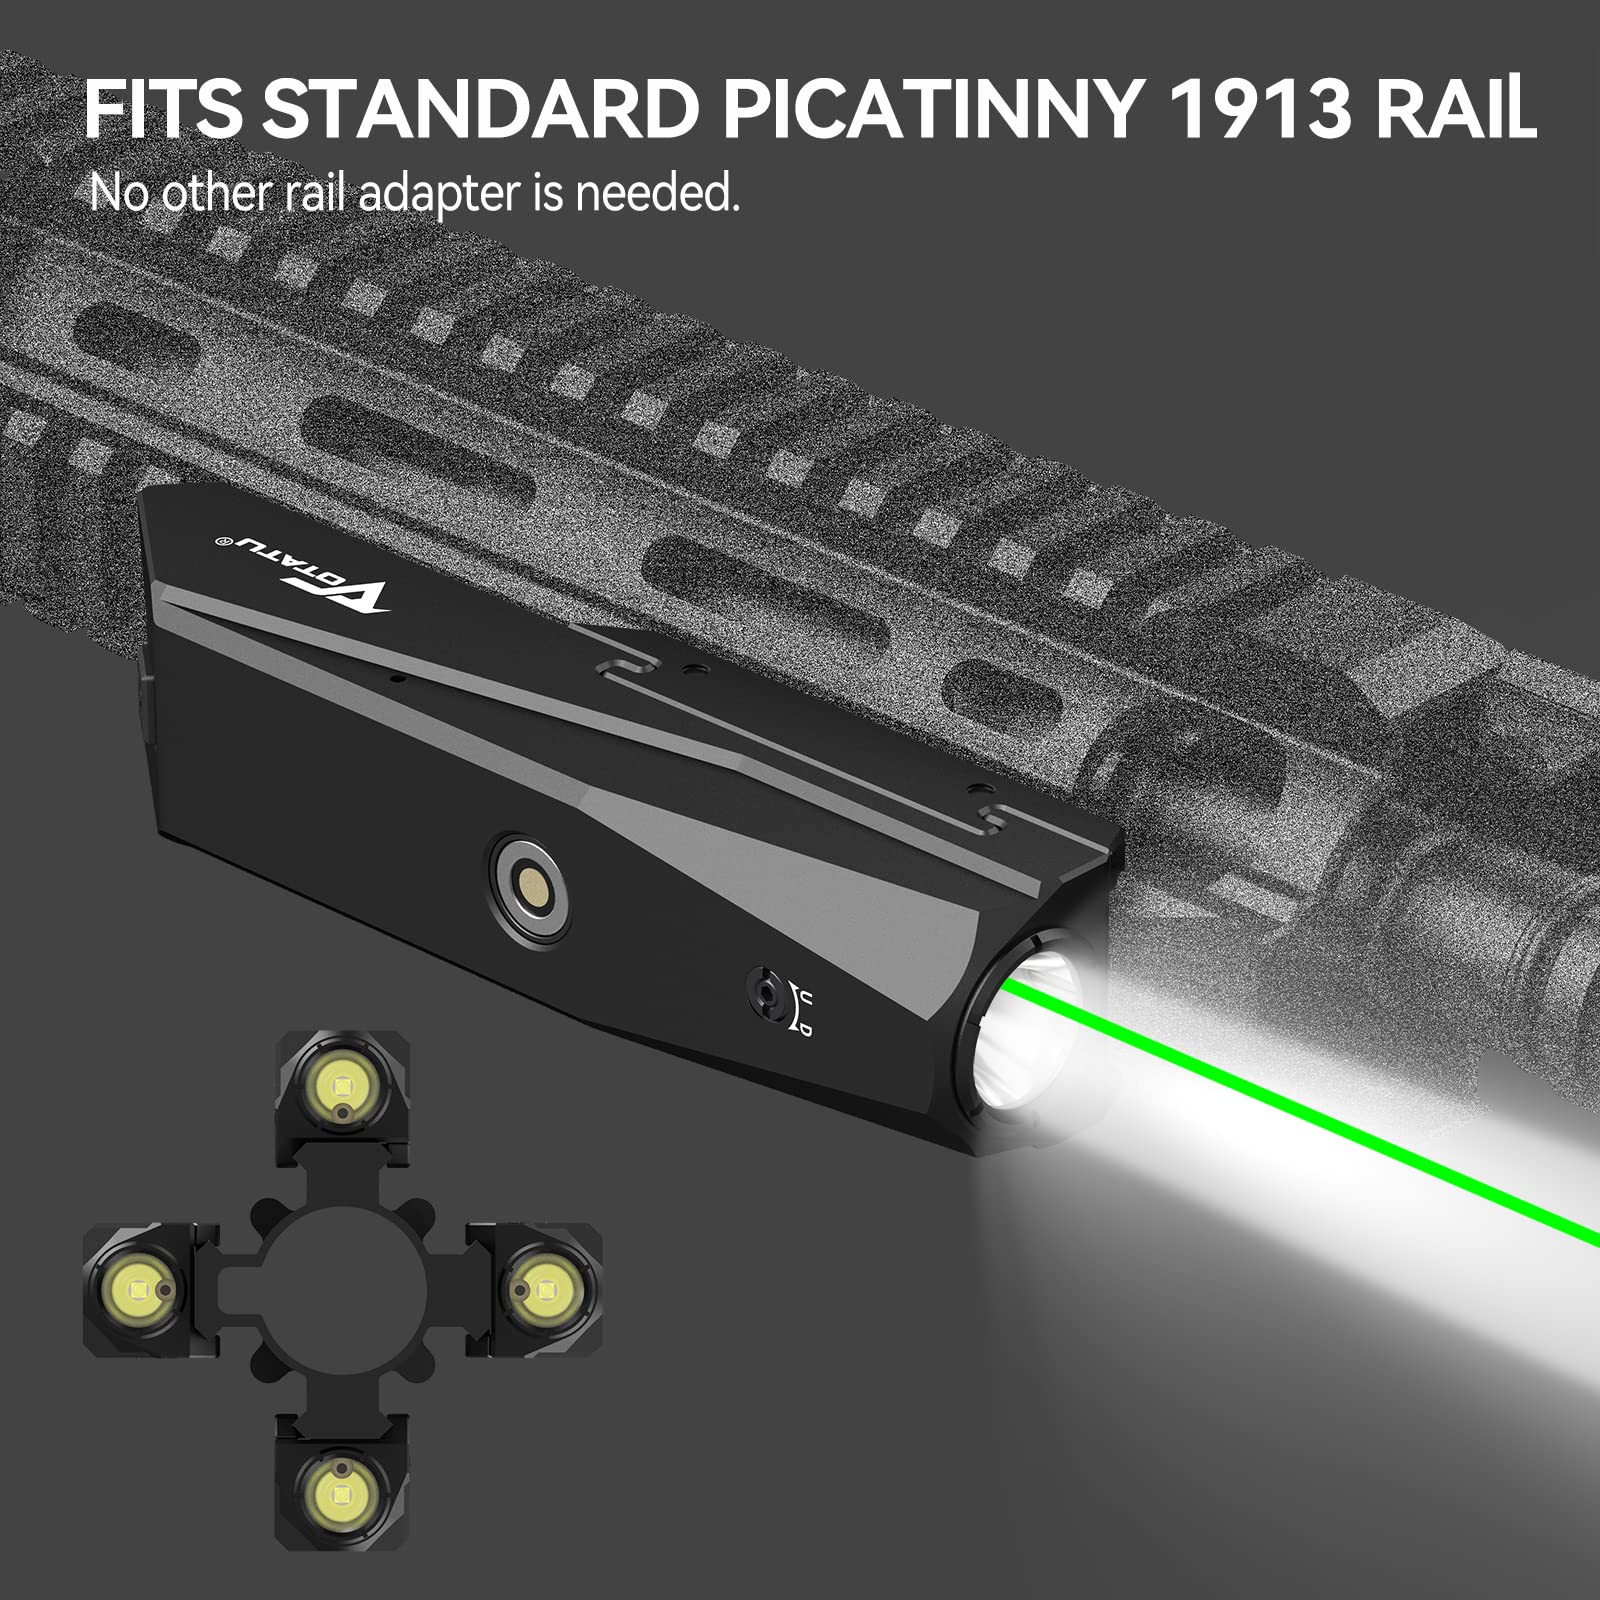 P9L-G Tactical Light Laser Combo - 1600 Lumens LED & Green Laser Sight for Picatinny Rails with Magnetic Charger and Momentary/Constant-on Switch